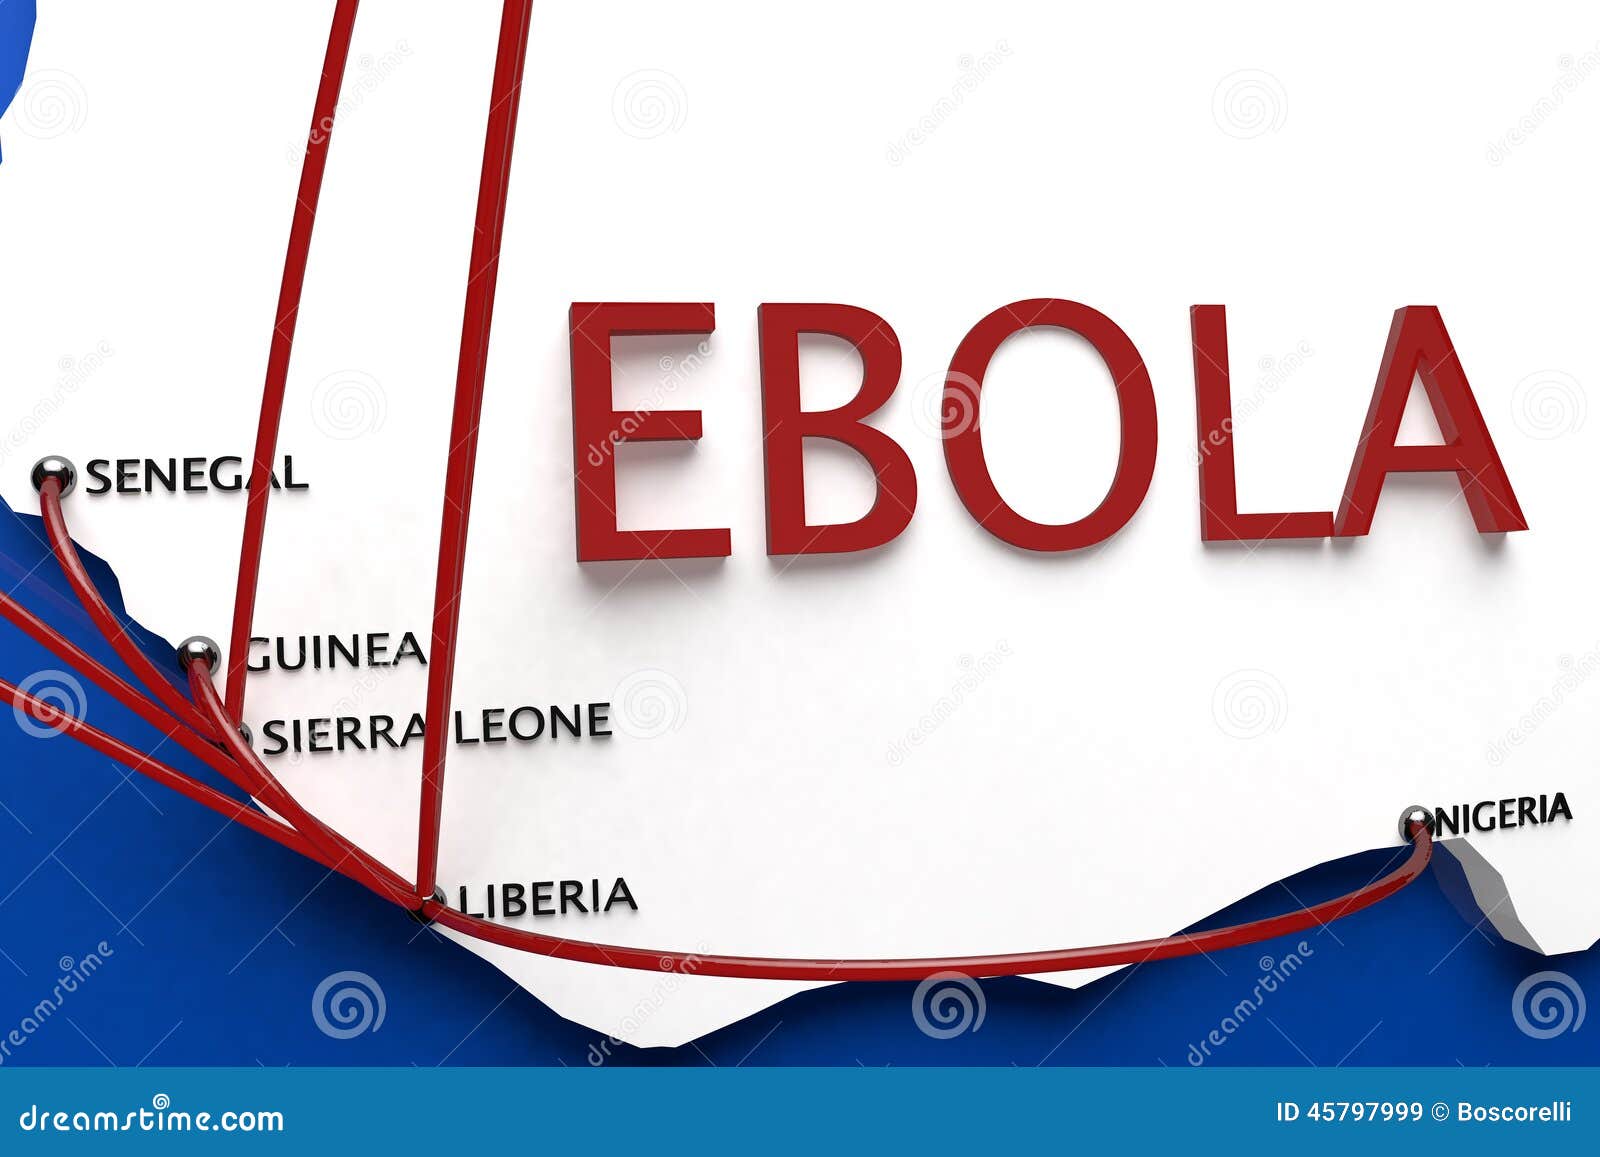 ebola in the outbreak countries in africa